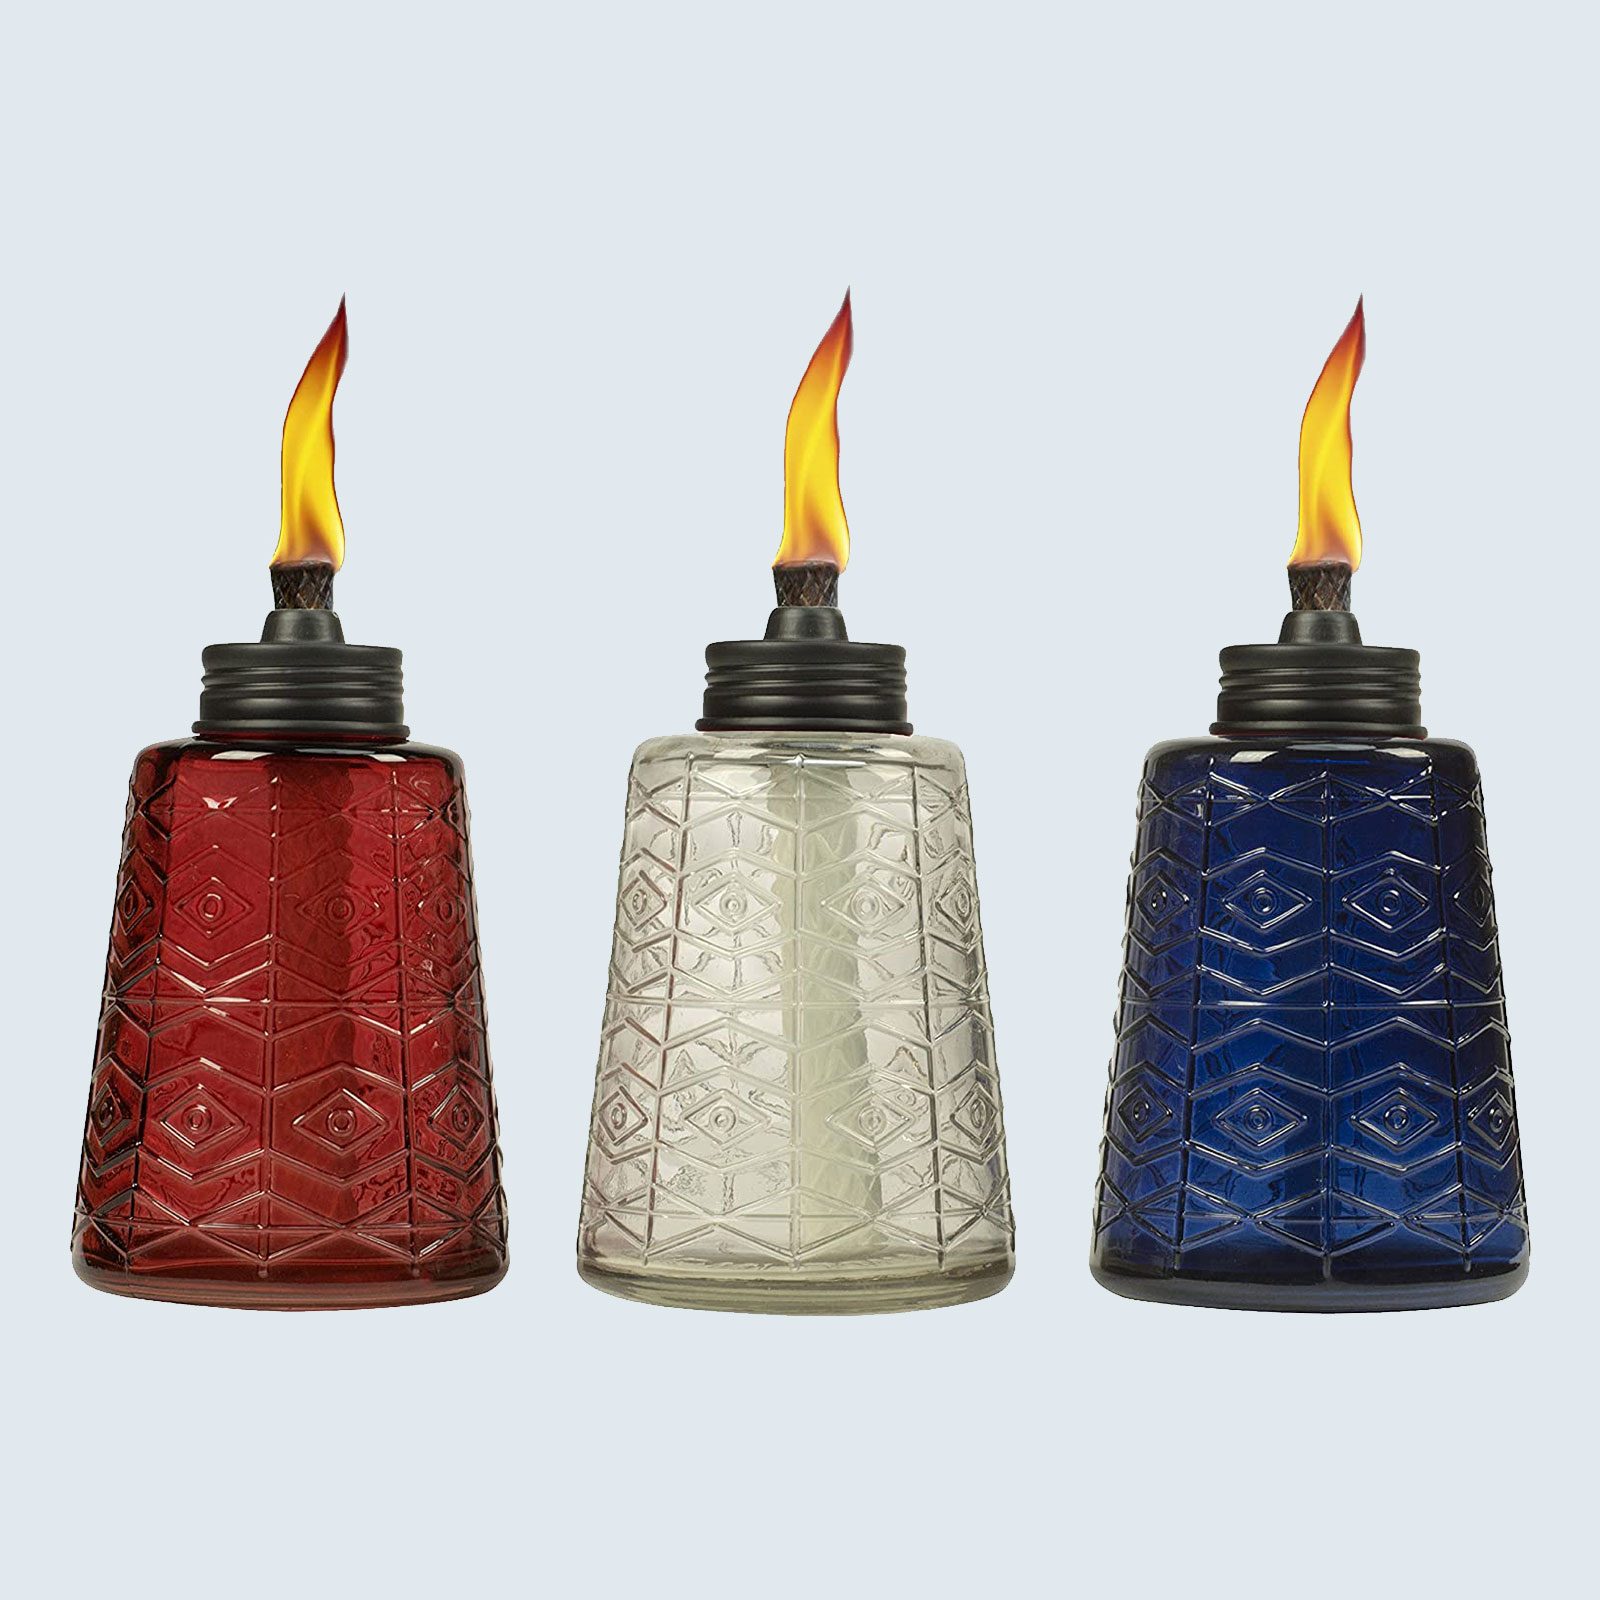 TIKI Brand 6-Inch Molded Glass Table Torch